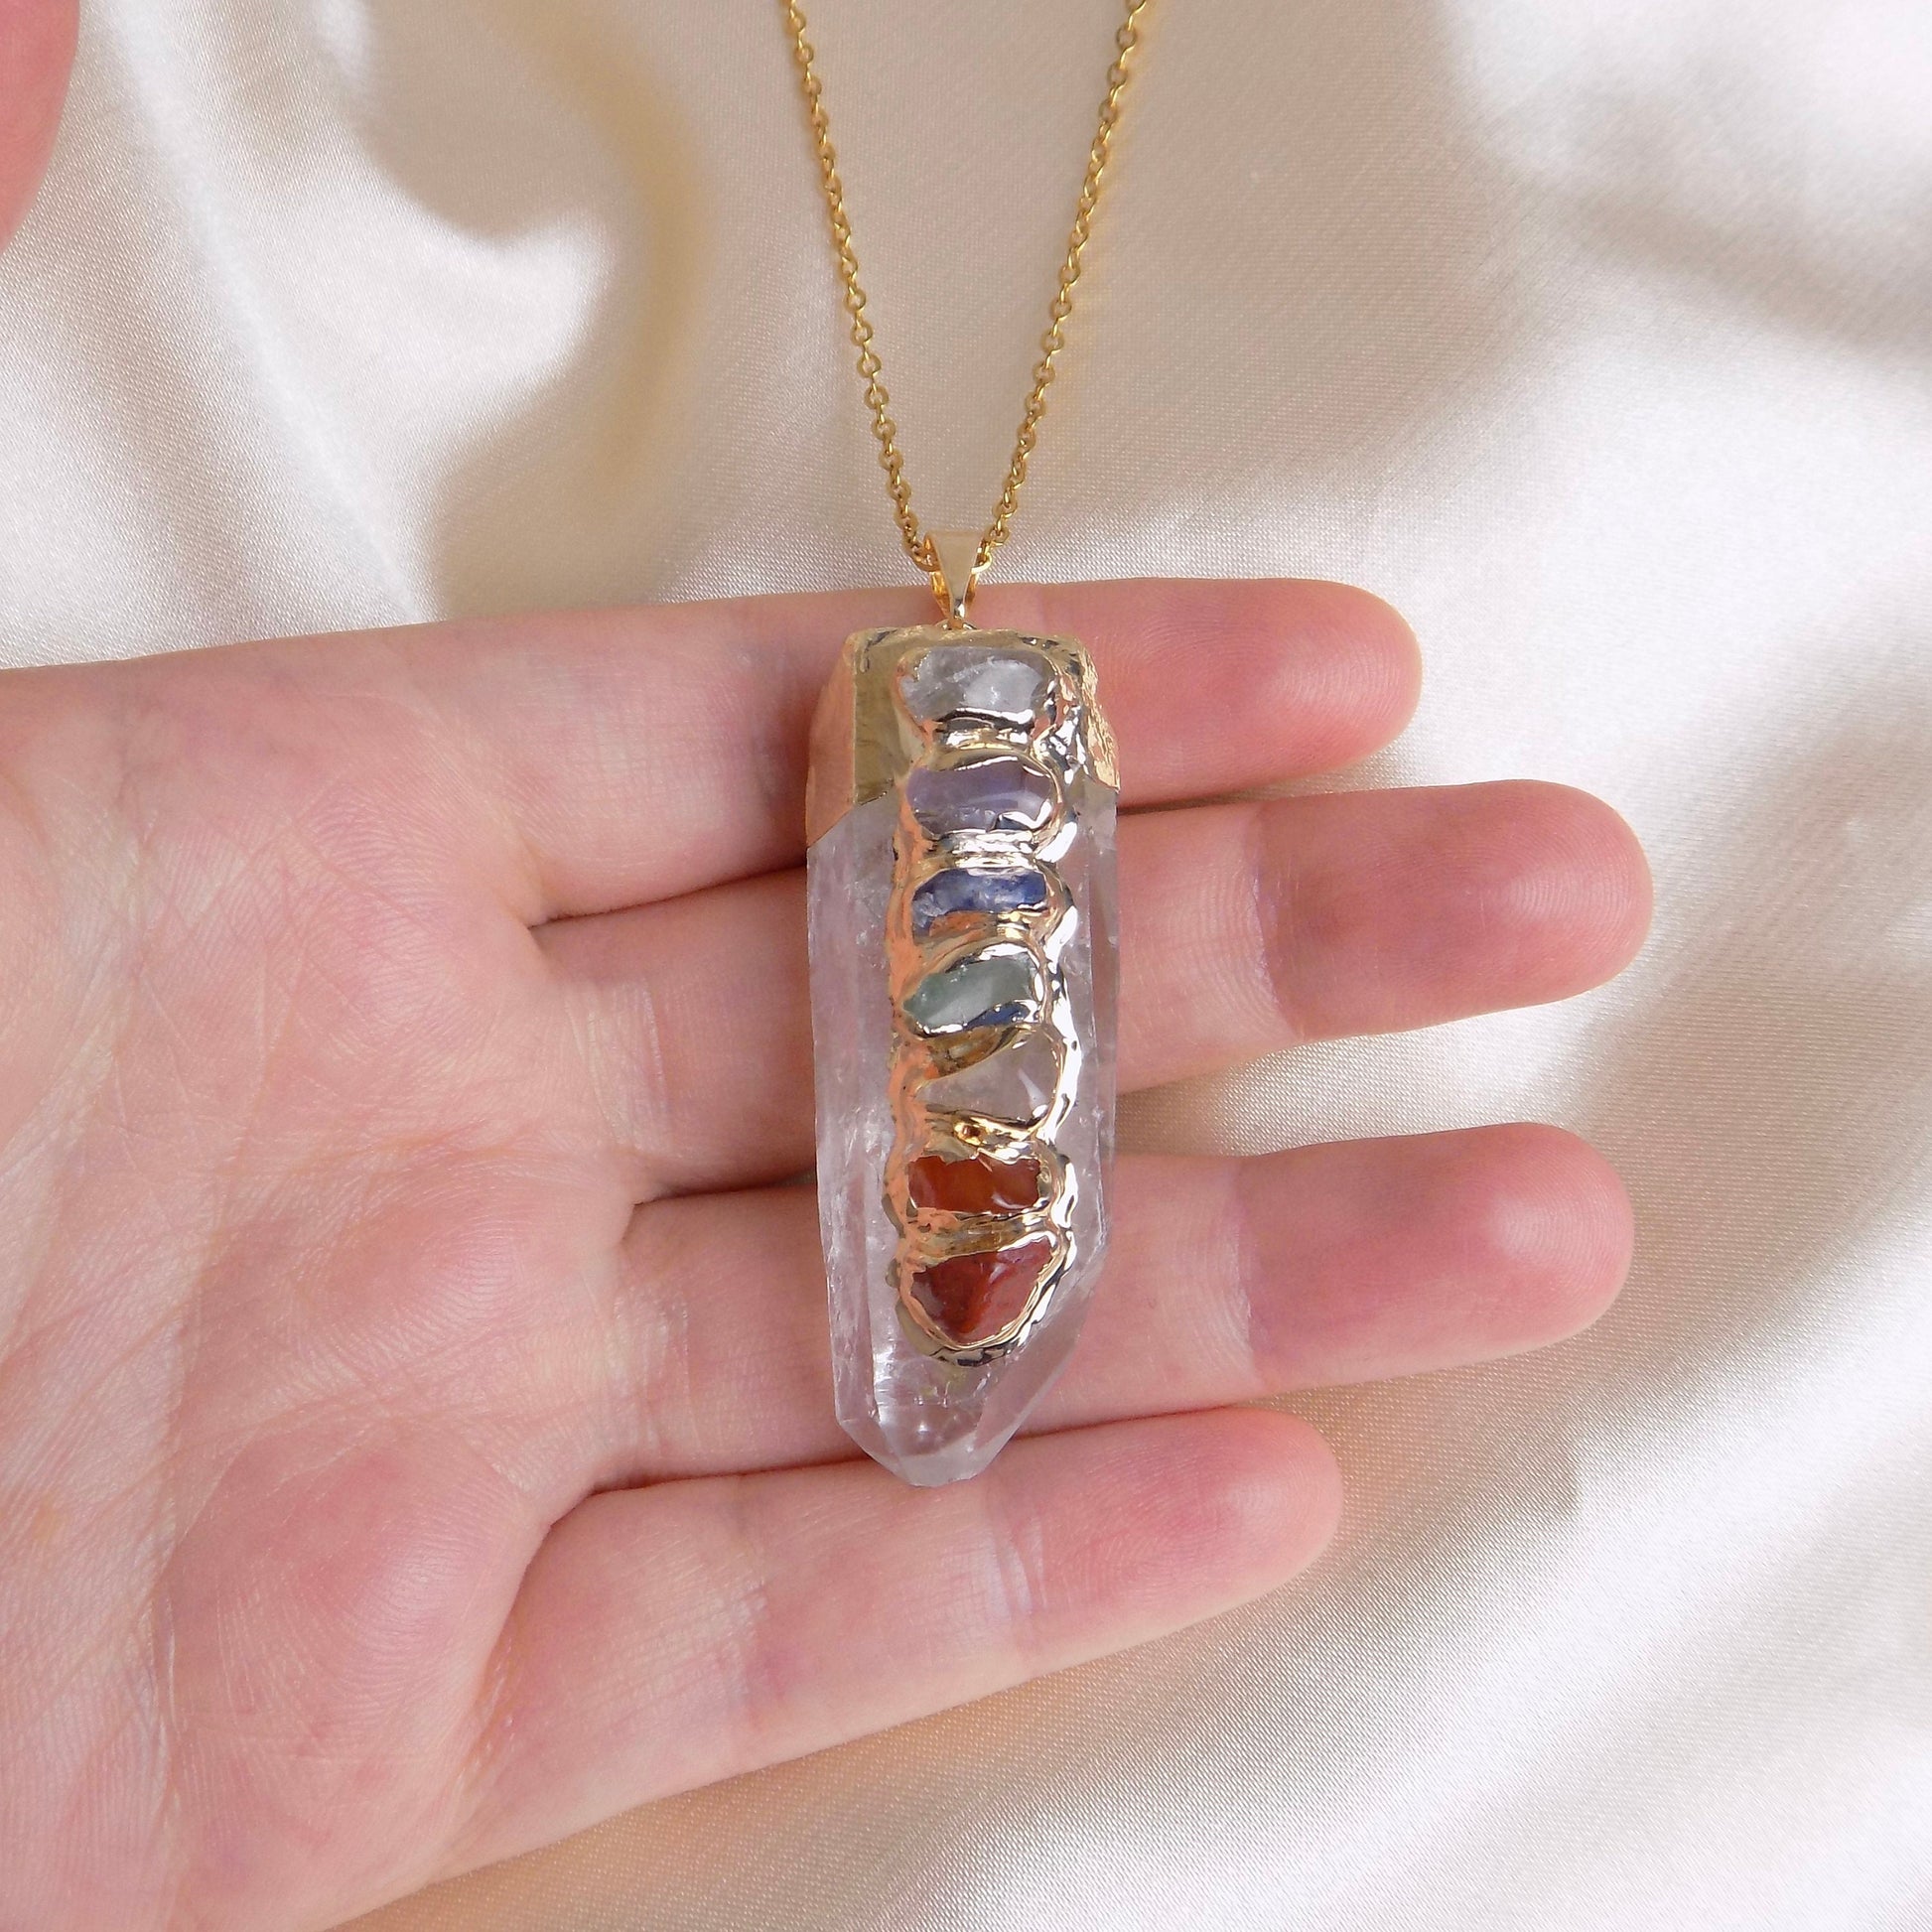 Large Chakra Necklace Gold, 7 Chakra Clear Crystal Pendant, Yoga Reiki Jewelry, Boho Necklaces For Women, Christmas Gift, G14-269